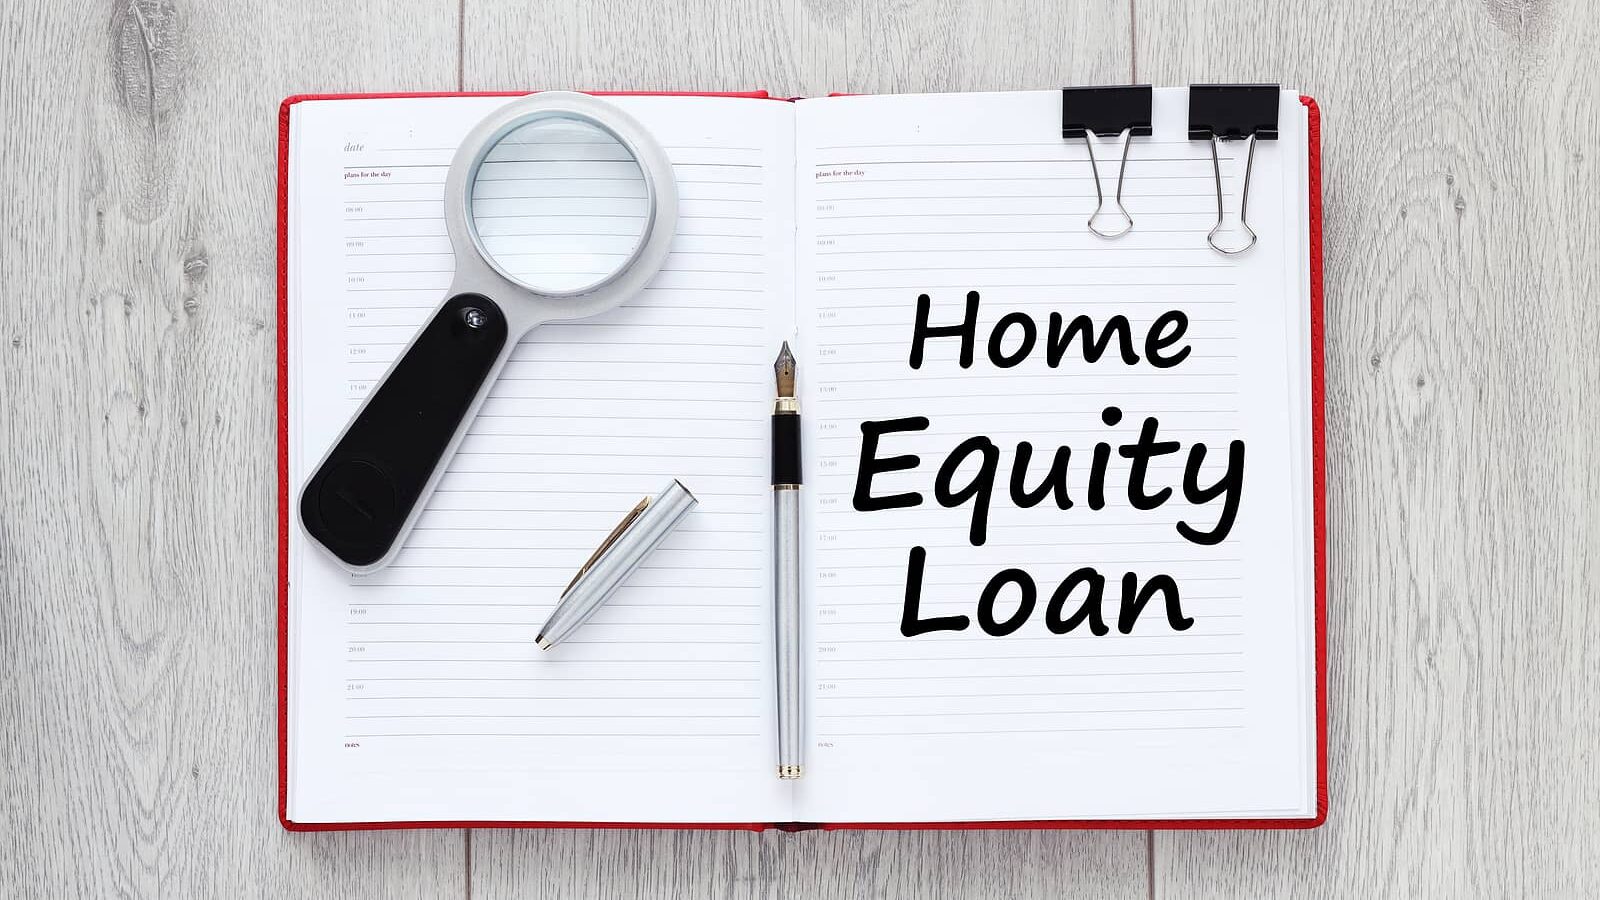 How Are Home Equity Loans Structured?